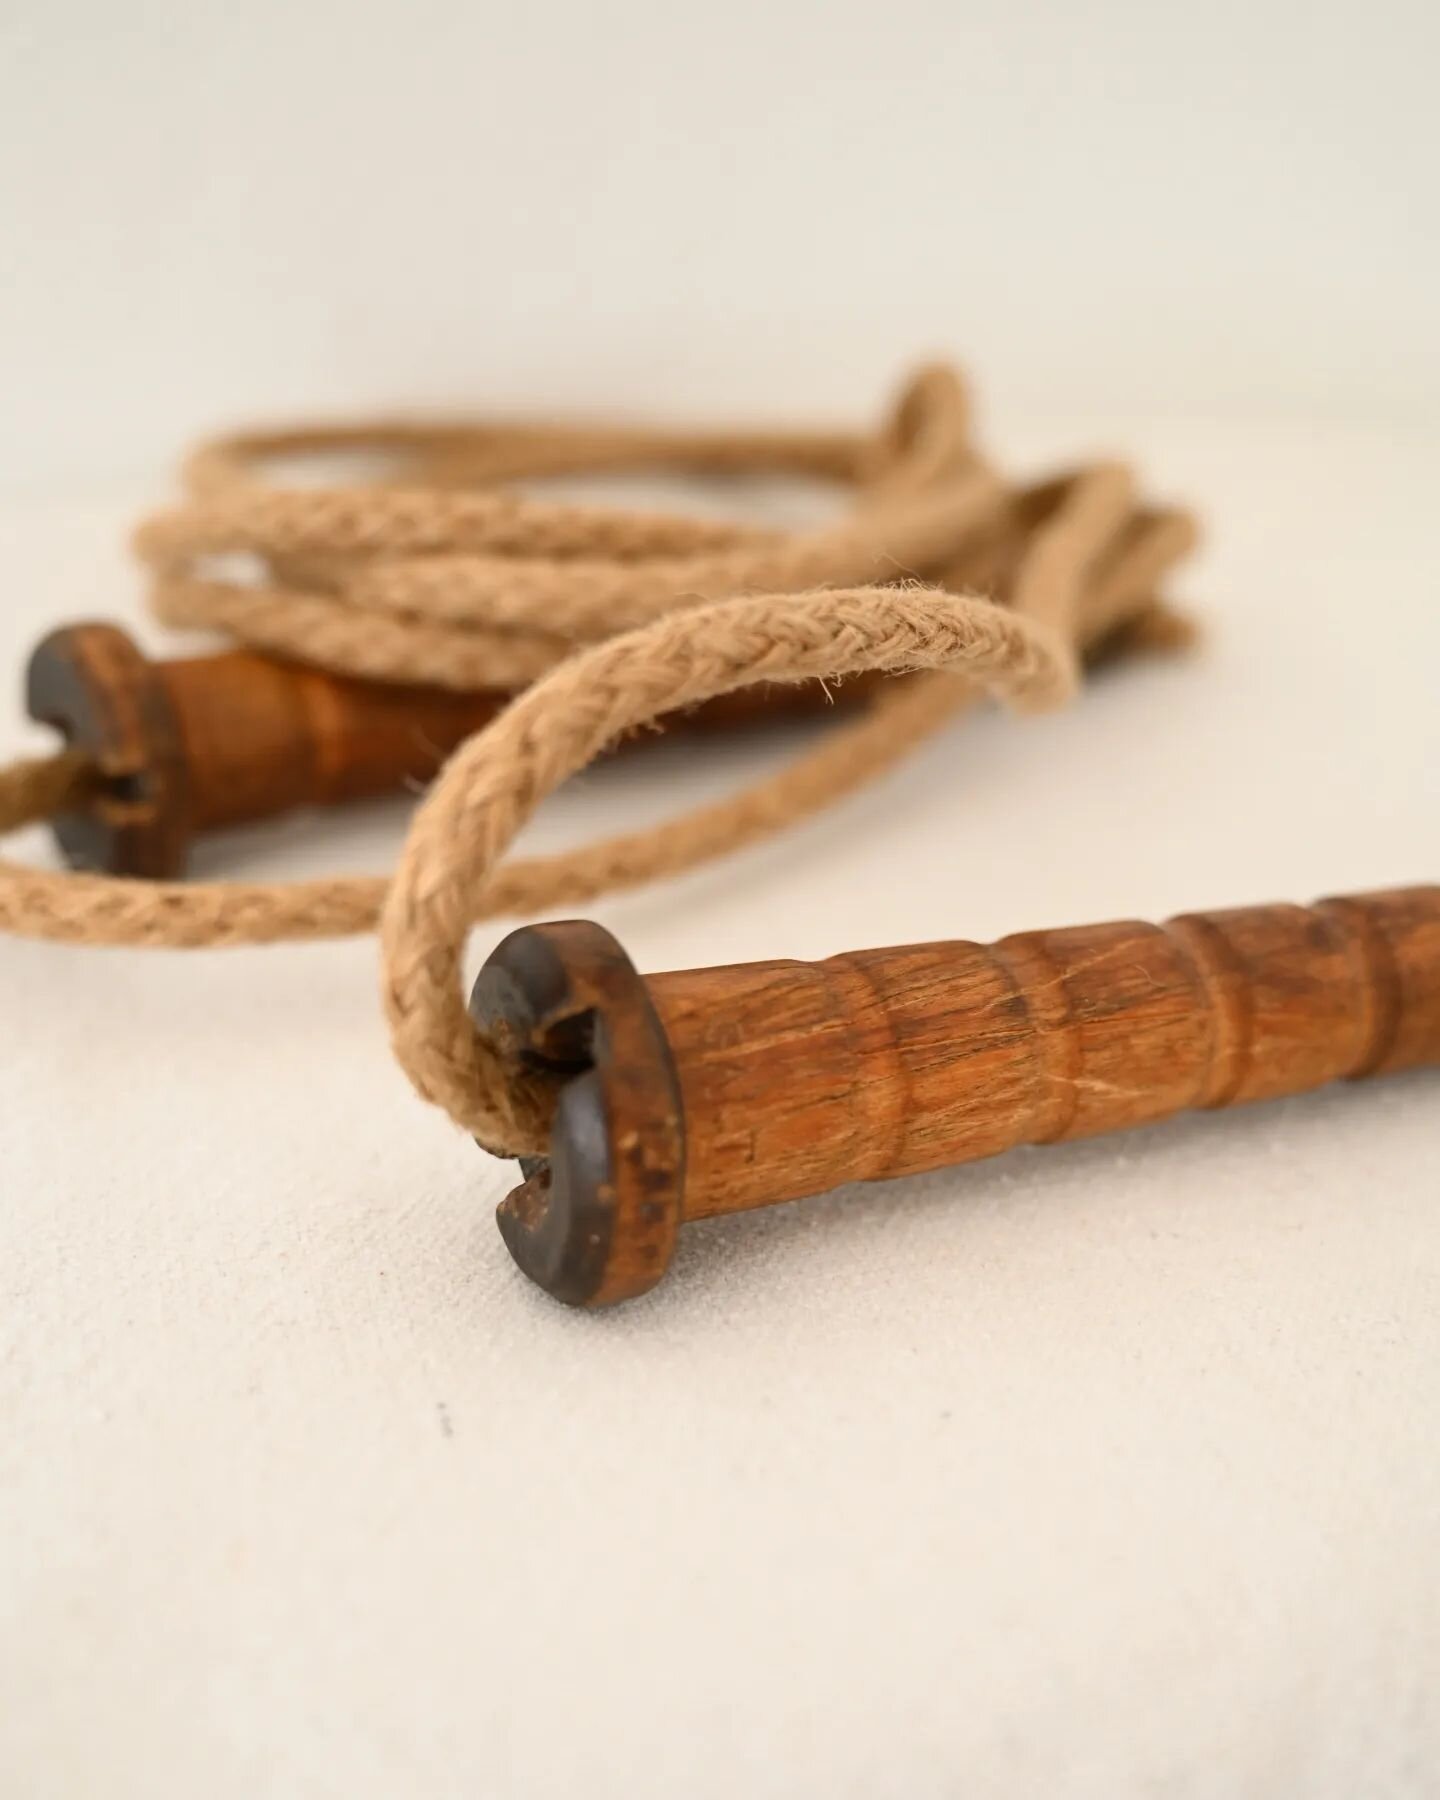 This beautiful antique jump rope is truly a special piece. The Salt's Mill Textile Factory opened in 1851 in the Victorian village of Saltaire in West Yorkshire, England.

The tightly woven jute fibers are delicately strung through the bobbins as the